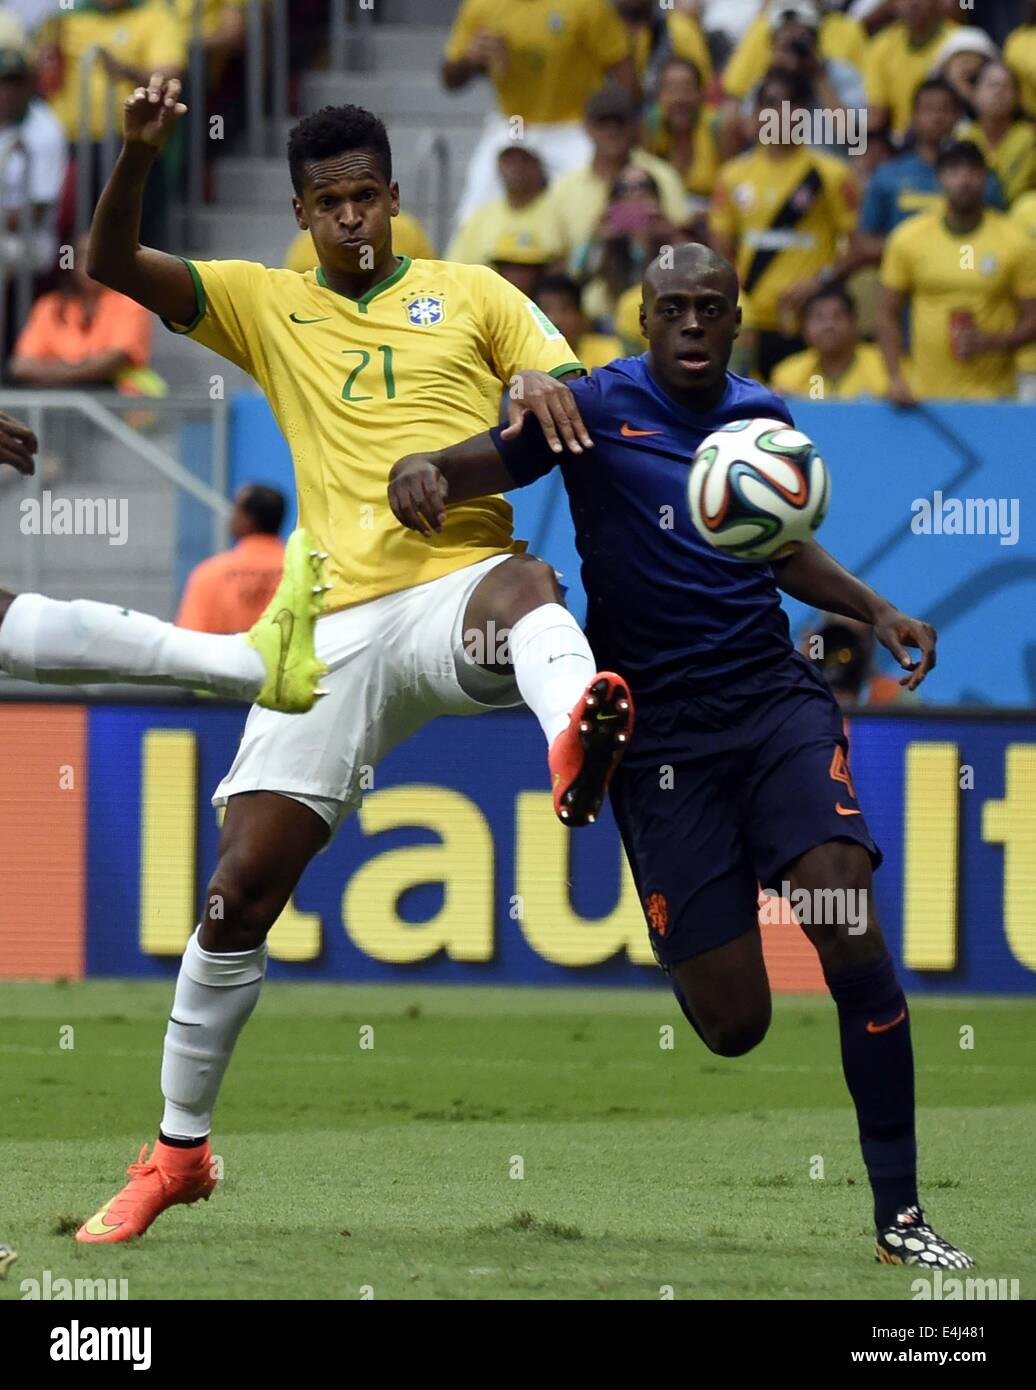 Brasilia, Brazil. 12th July, 2014. Netherlands' Bruno Martins Indi vies  with Brazil's Jo during the third place play-off match between Brazil and  Netherlands of 2014 FIFA World Cup at the Estadio Nacional